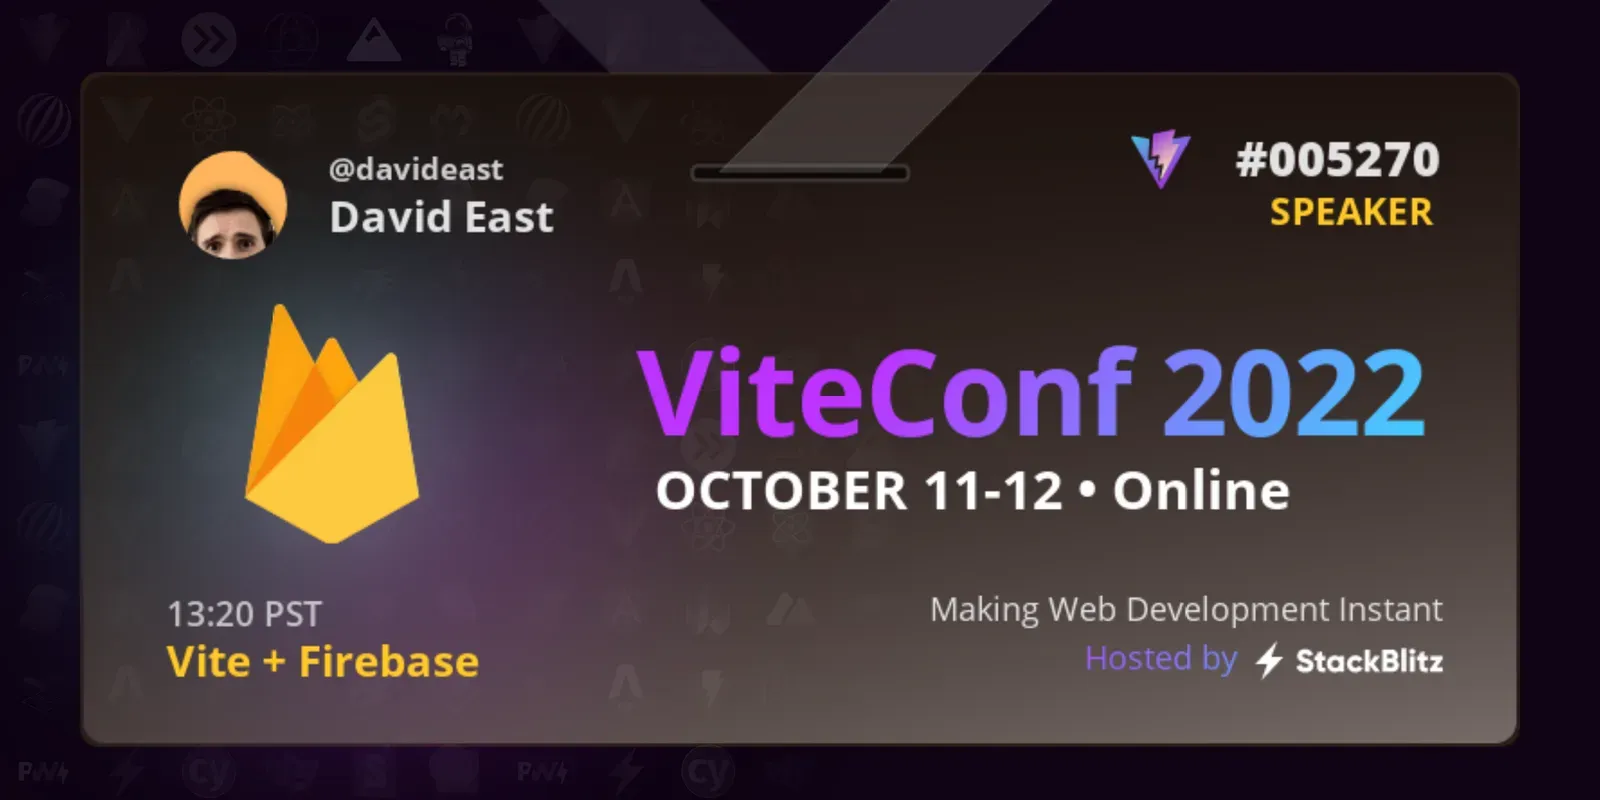 A ticket for ViteConf that features a picture of David East and the Firebase logo